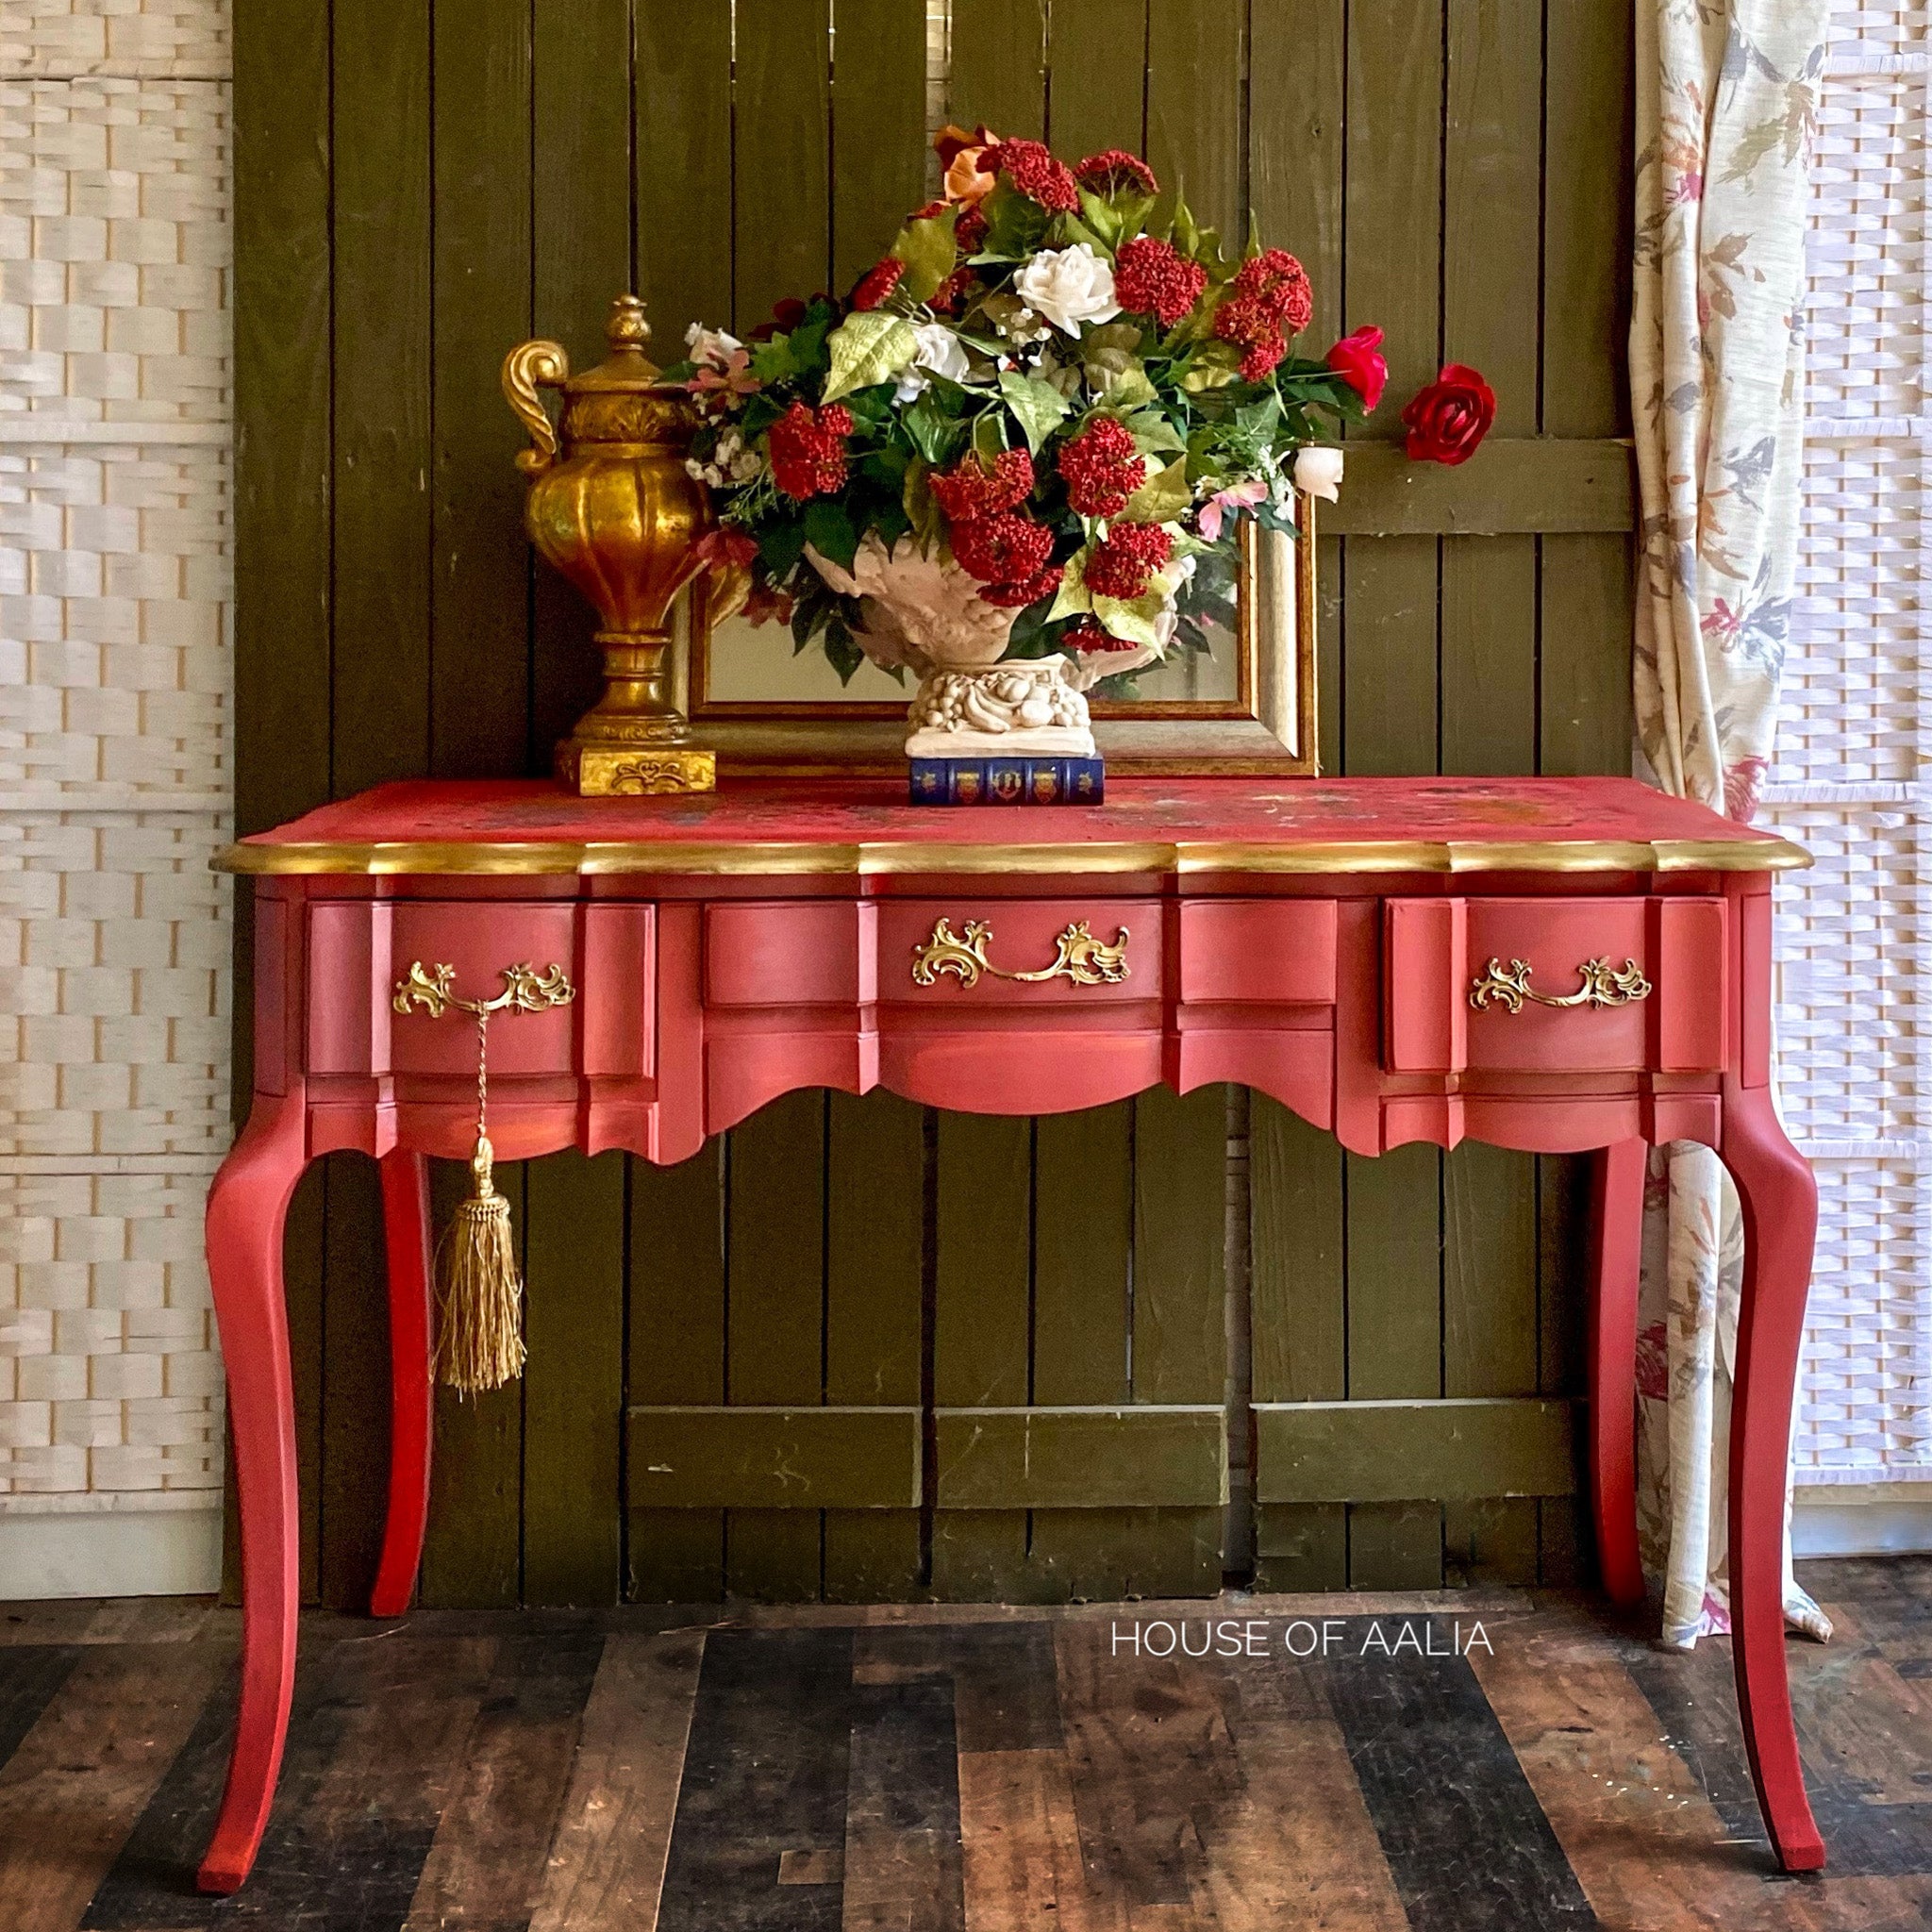 A vintage desk refurbished by House of Aalia is painted in Dixie Belle's Rustic Red and has gold accents.